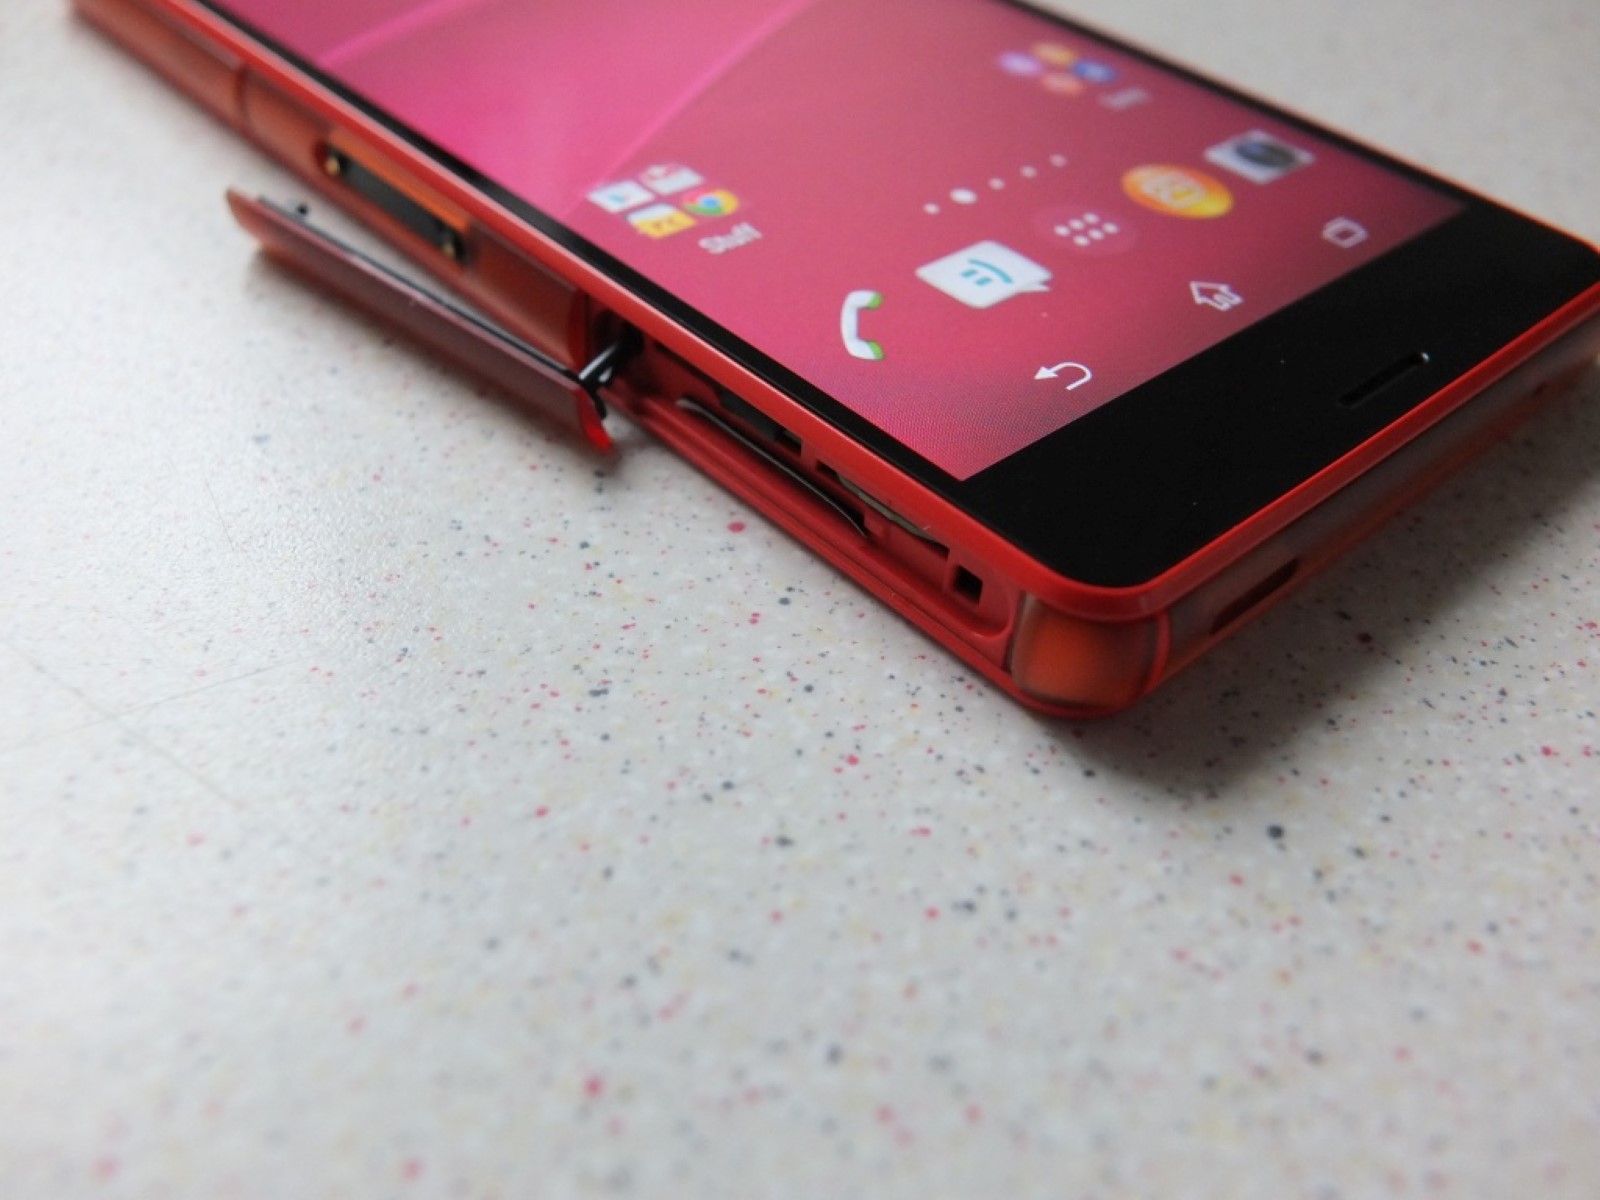 Xperia Z3 Compact SIM Insertion: A Step-by-Step Guide